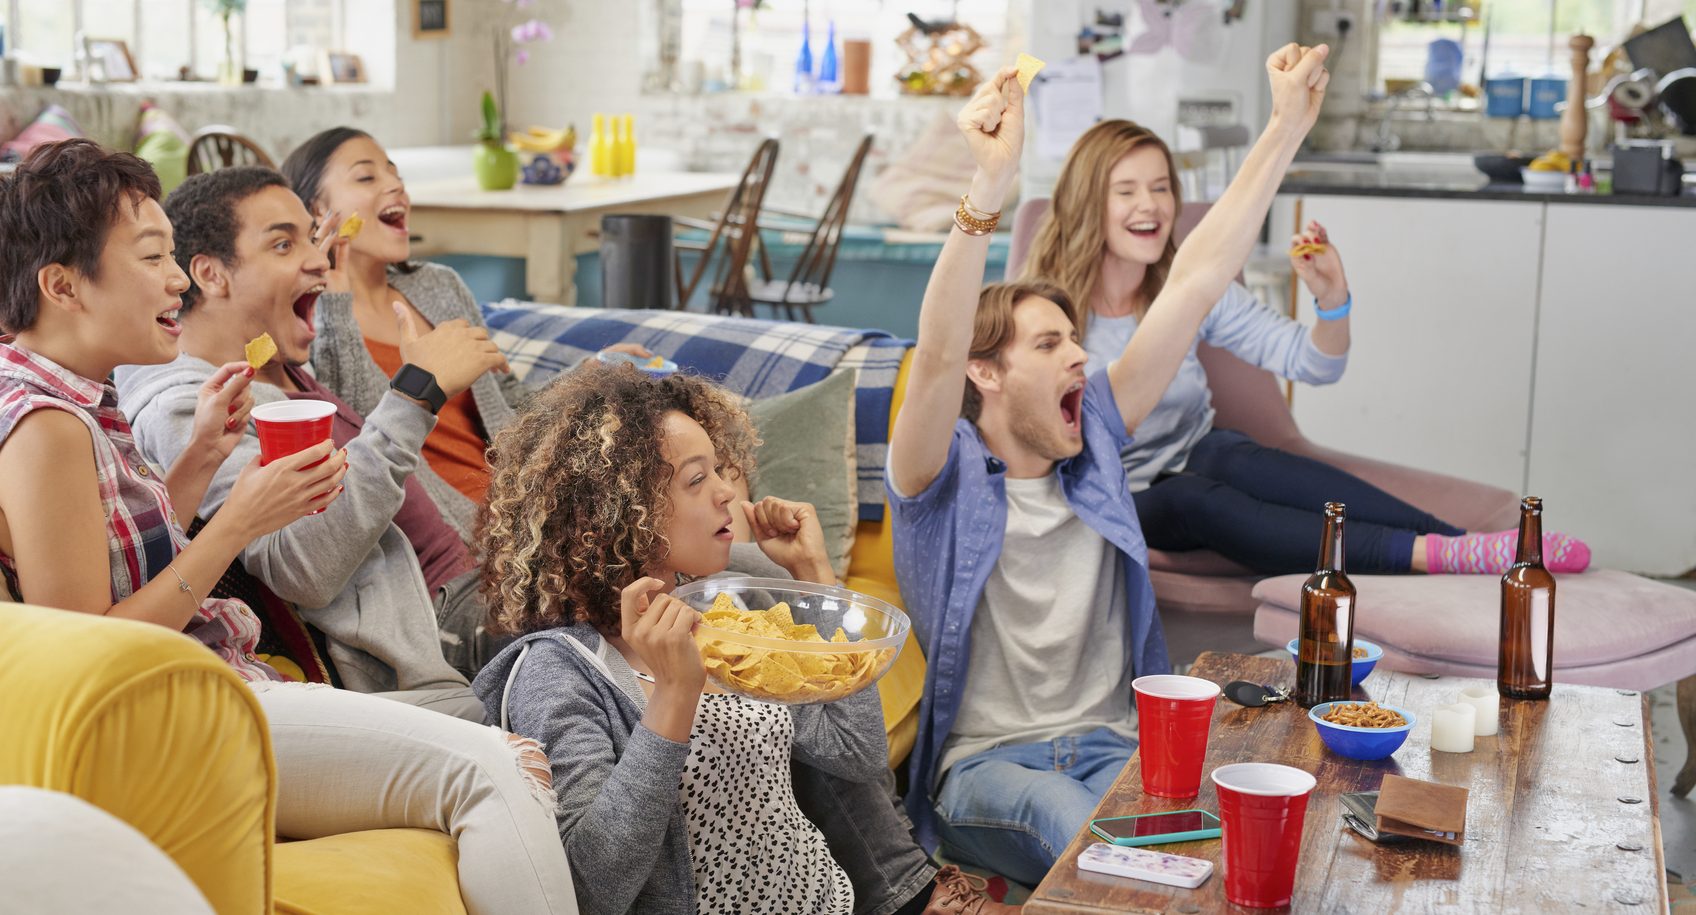 35% of Americans Under 30 Have Never Paid For Cable TV